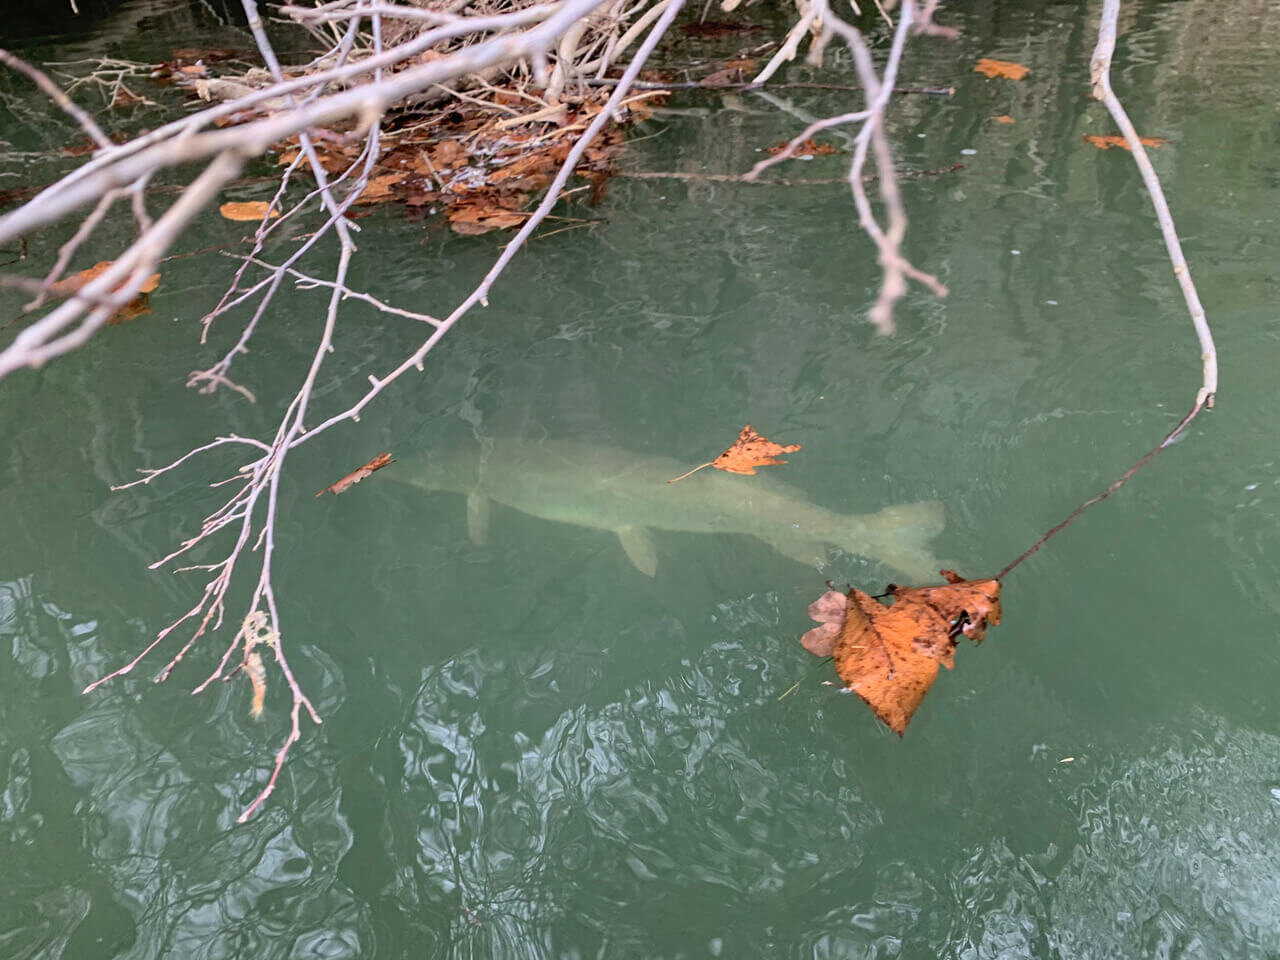 Musky fishing in Western NC and East TN, How to stay safe and dry during  winter season — Asheville Fly Fishing Company, Asheville, Western NC